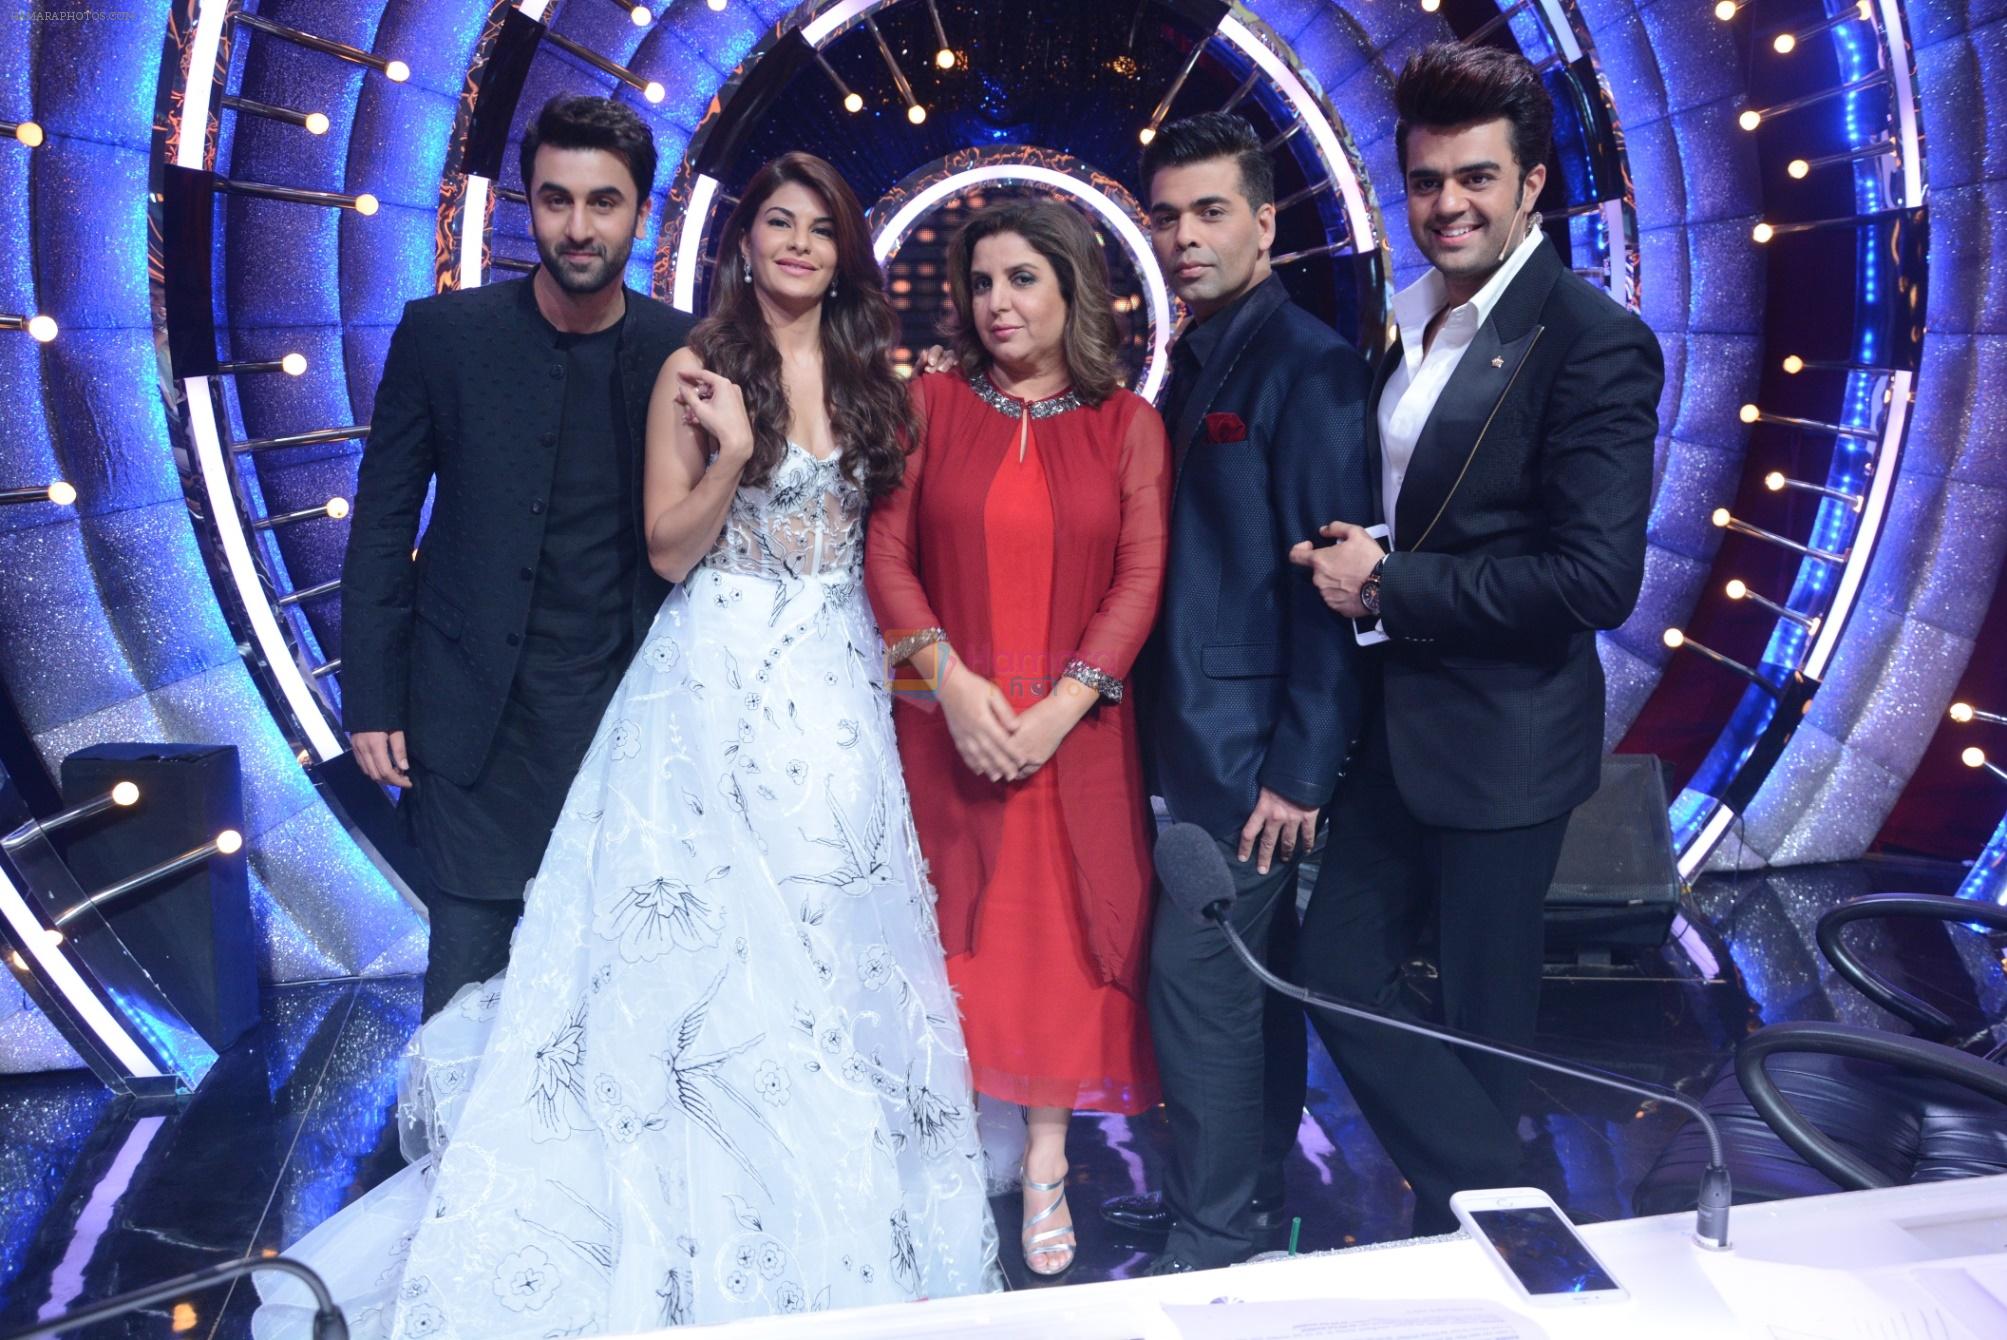 Ranbir Kapoor on the sets of Jhalak Dikhhla Jaa for the promotion of his upcoming movie Ae Dil Hai Mushkil on 17th Oct 2016